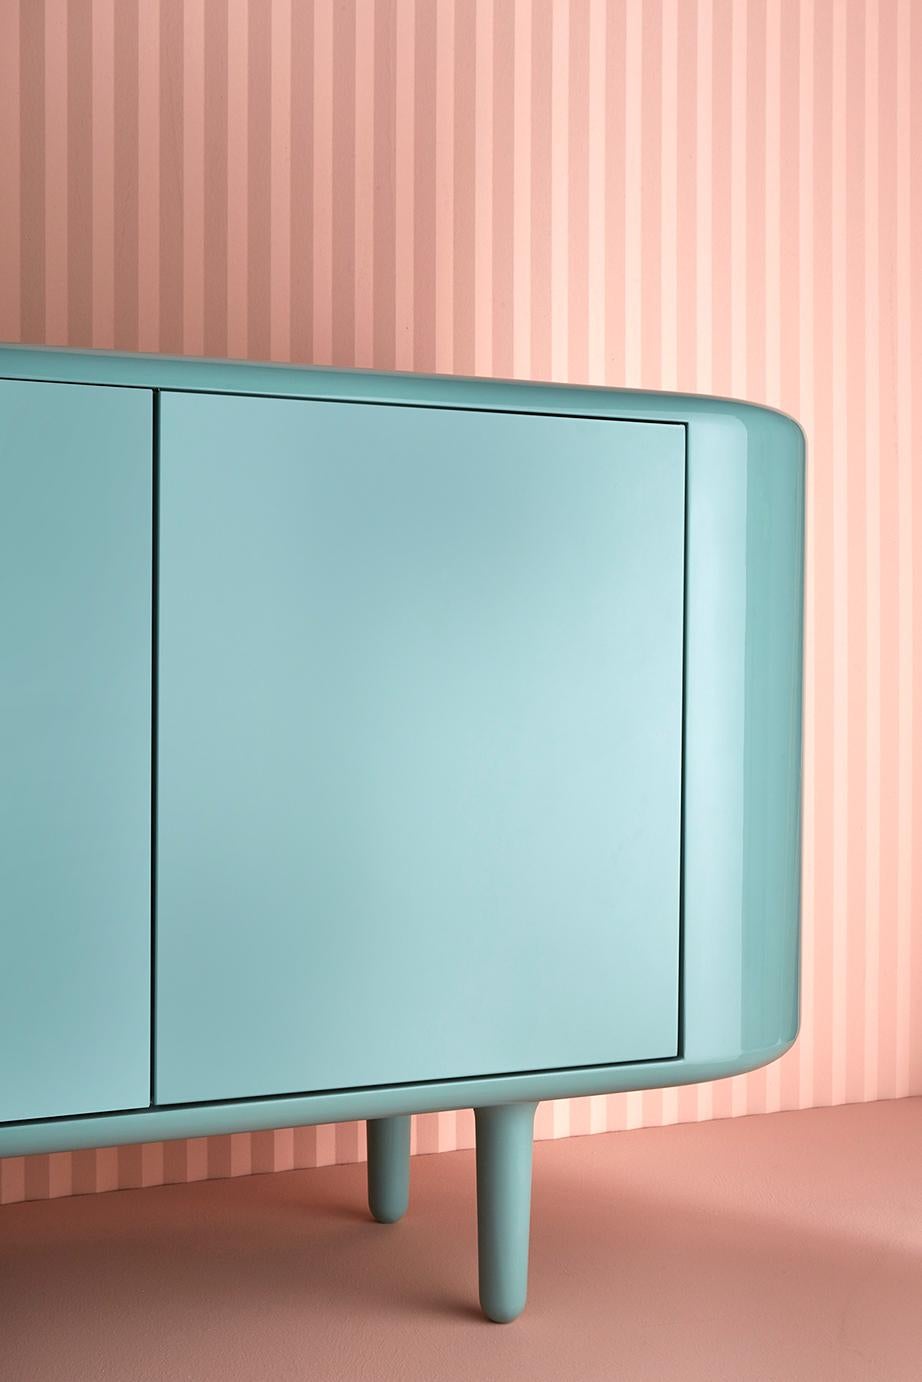 Settebello Cabinet, Colorama Collection
Design by Matteo Zorzenoni for Scapin Collezioni

The Settebello’s cabinet takes its name from the famous ETR 300 train, whose
characteristic was a large circular window at the front and rear of the train.